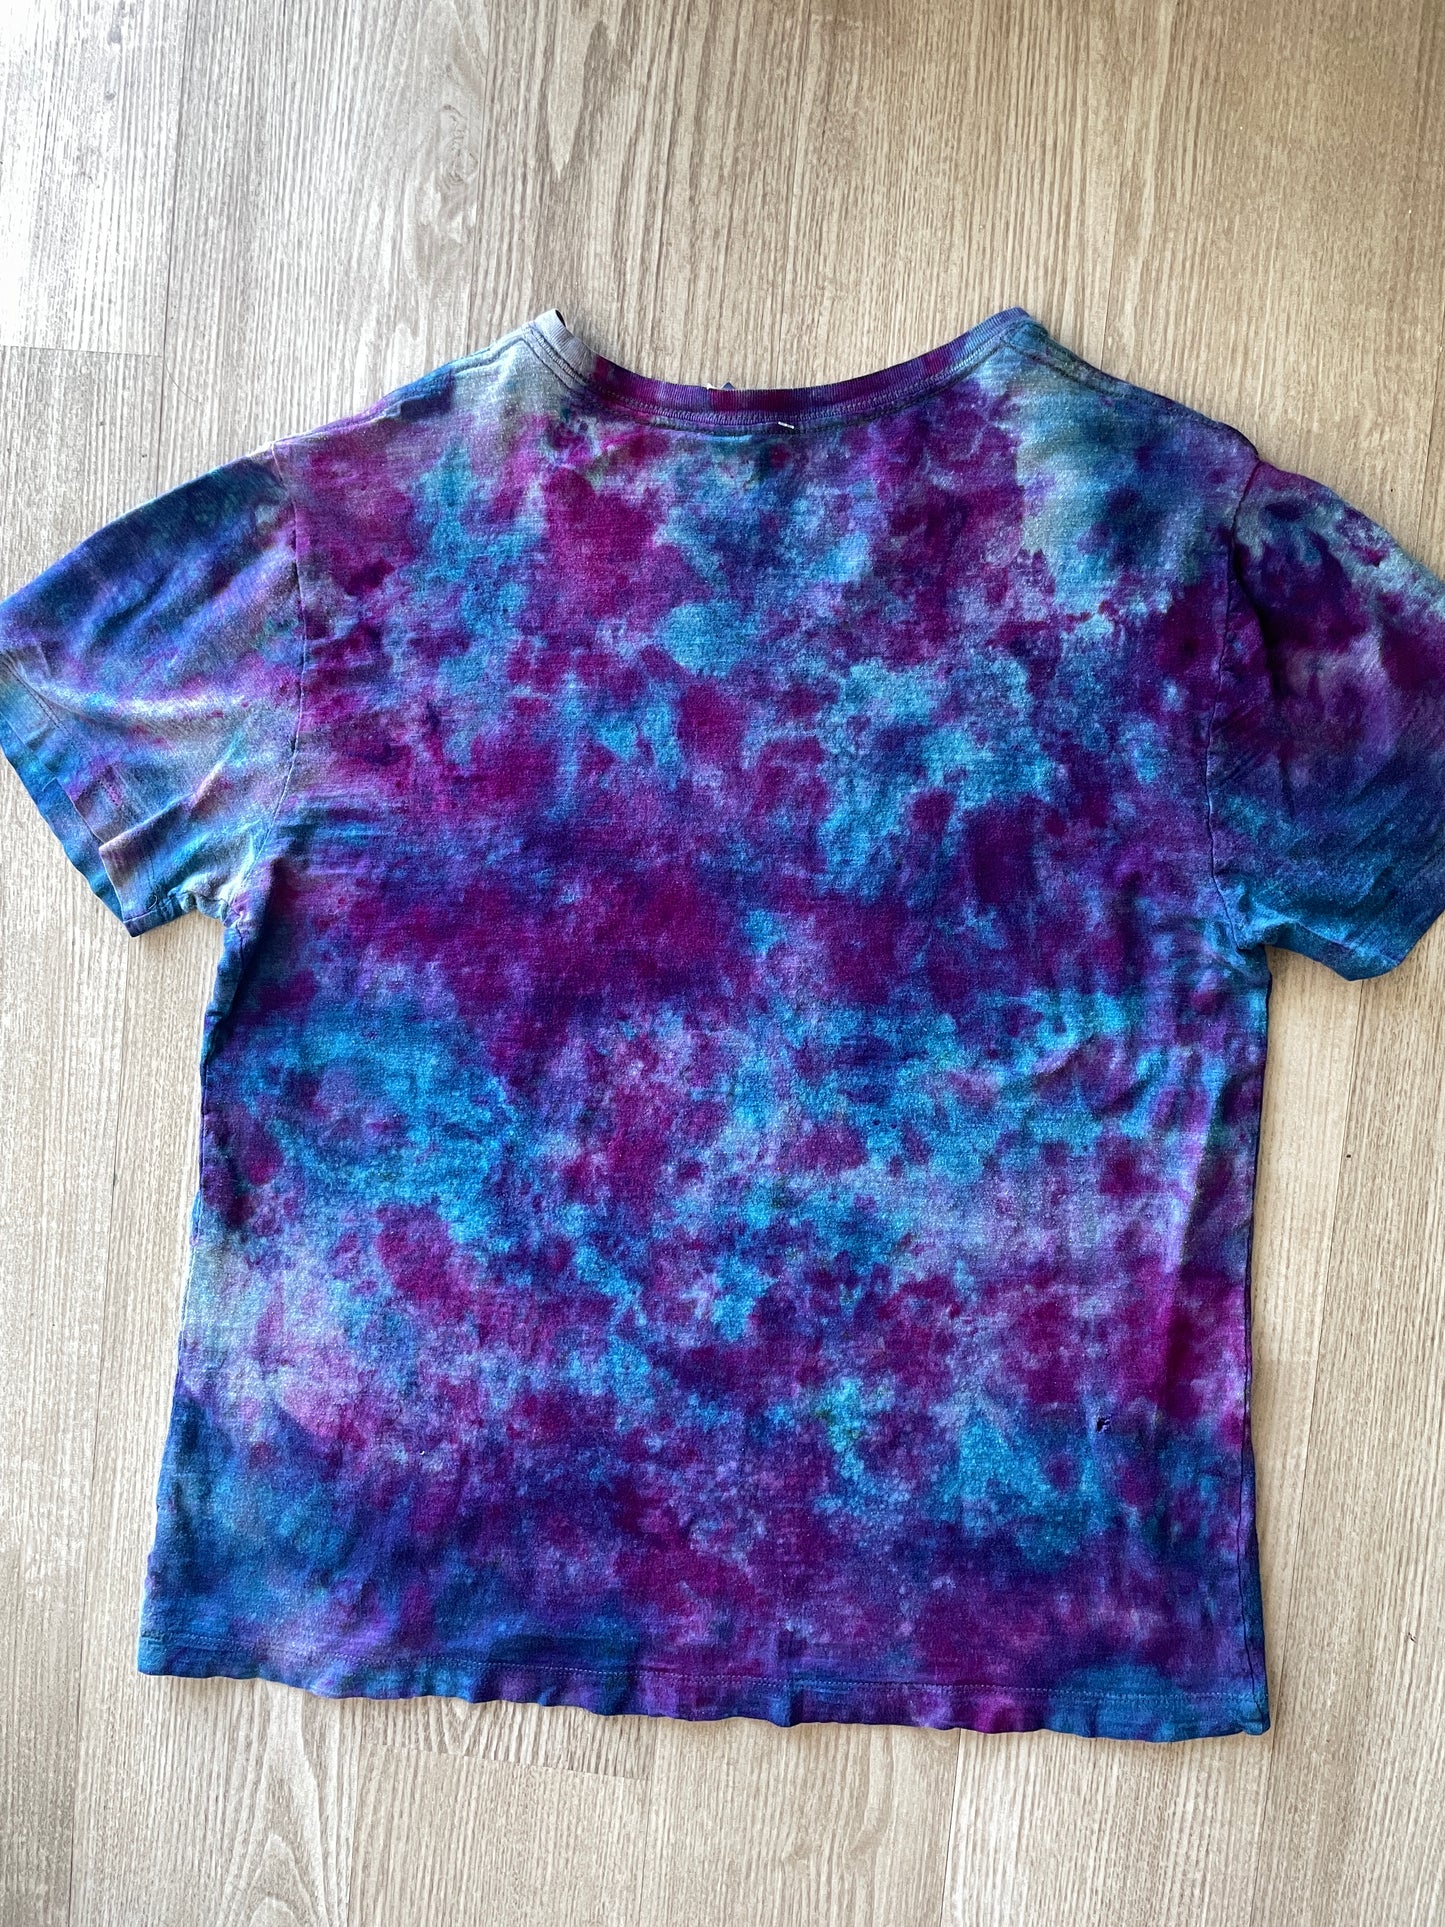 LARGE Women’s GAP London, UK Handmade Galaxy Tie Dye Short Sleeve T-Shirt | One-Of-a-Kind Upcycled Blue and Purple Top